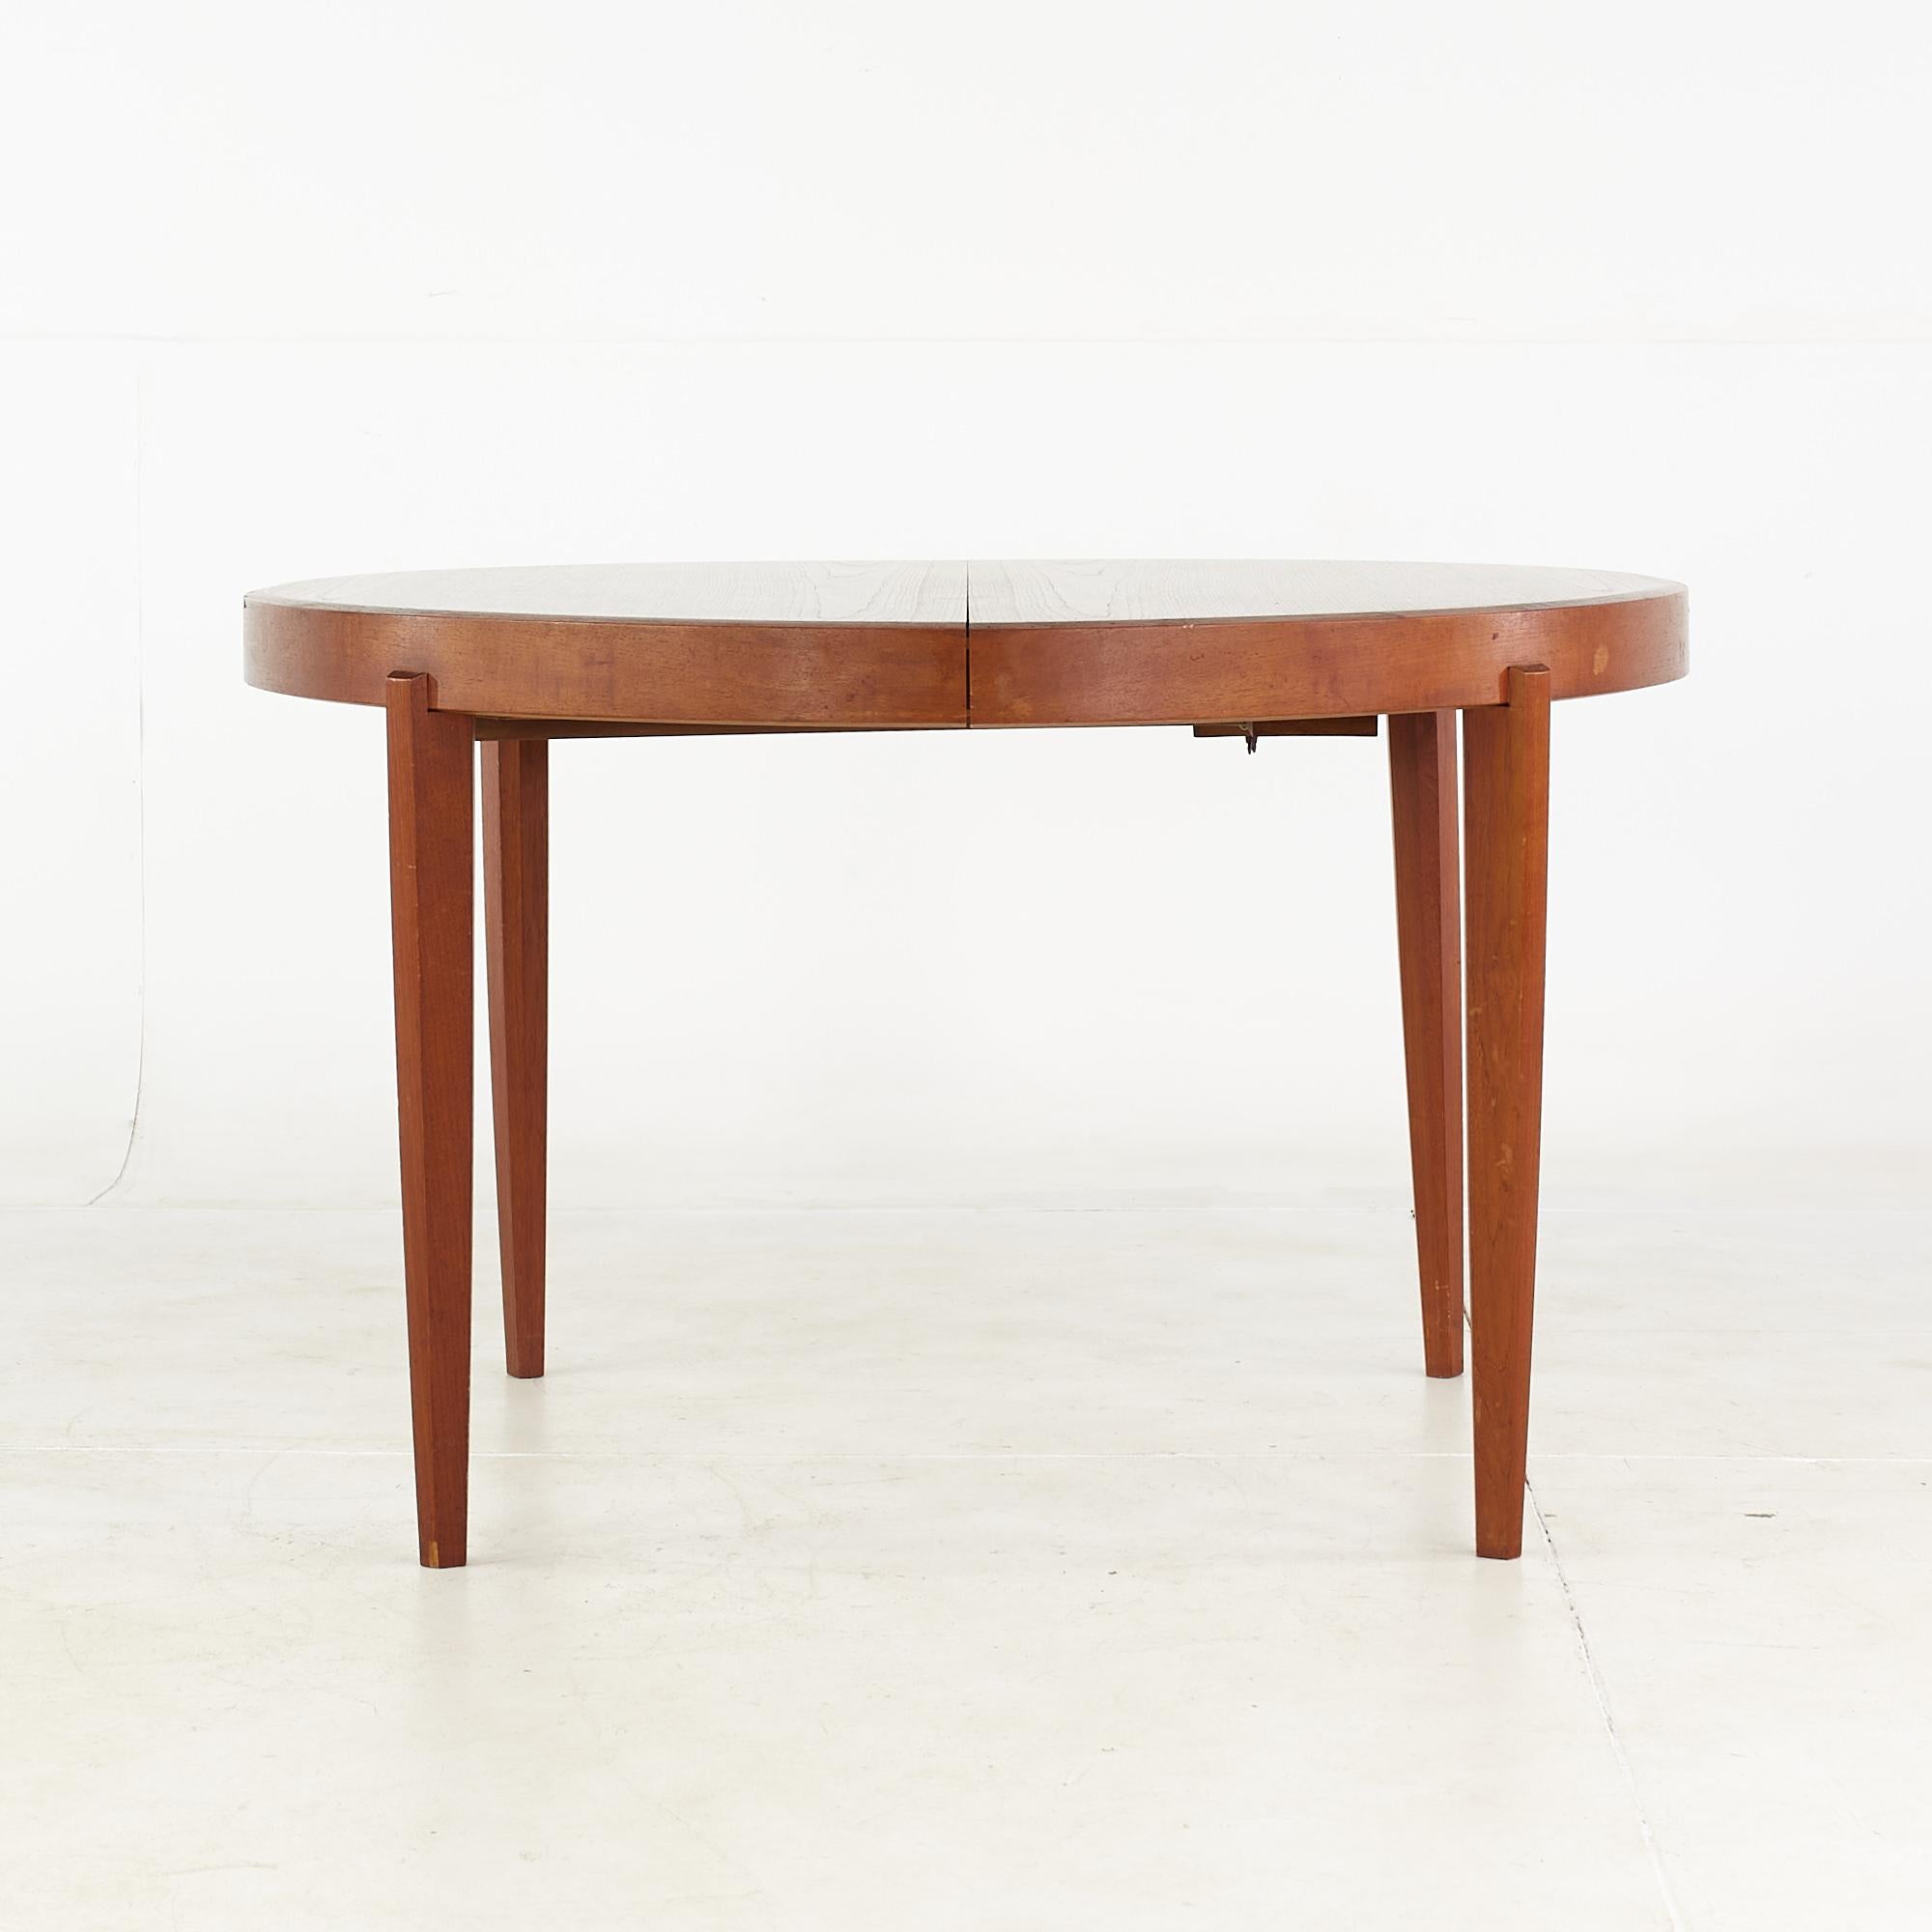 Johannes Andersen style mid-century teak expanding dining table with 4 leaves.

This table measures: 47.25 wide x 47.25 deep x 29 high, with a chair clearance of 26.5 inches, each leaf measures 21.75 inches wide, making a maximum table width of